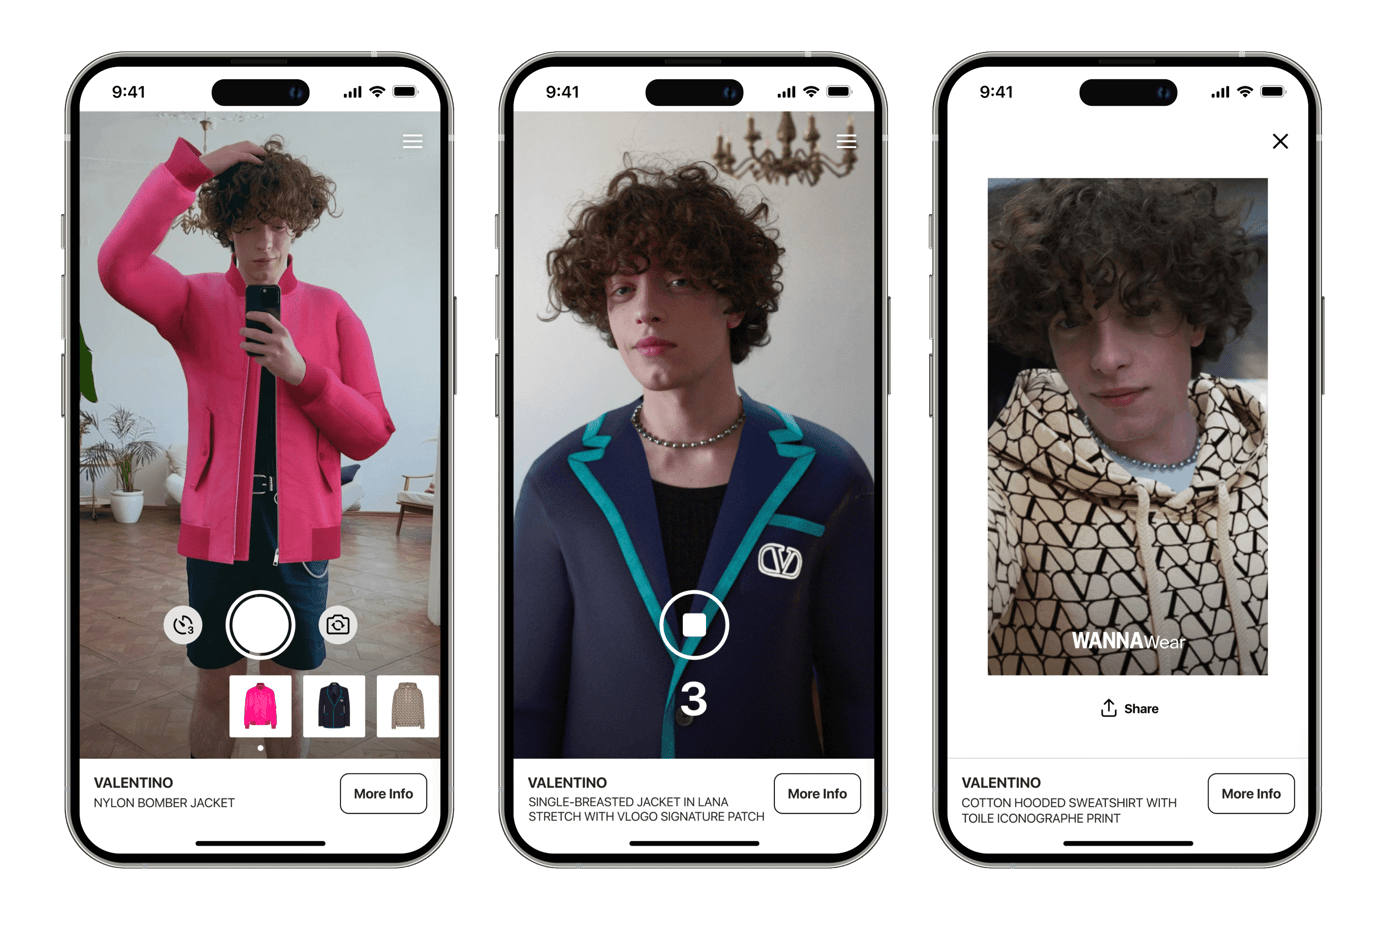 Jobtilbud generøsitet falanks Valentino to partake in virtual try-on pilot with Farfetch-owned Wanna